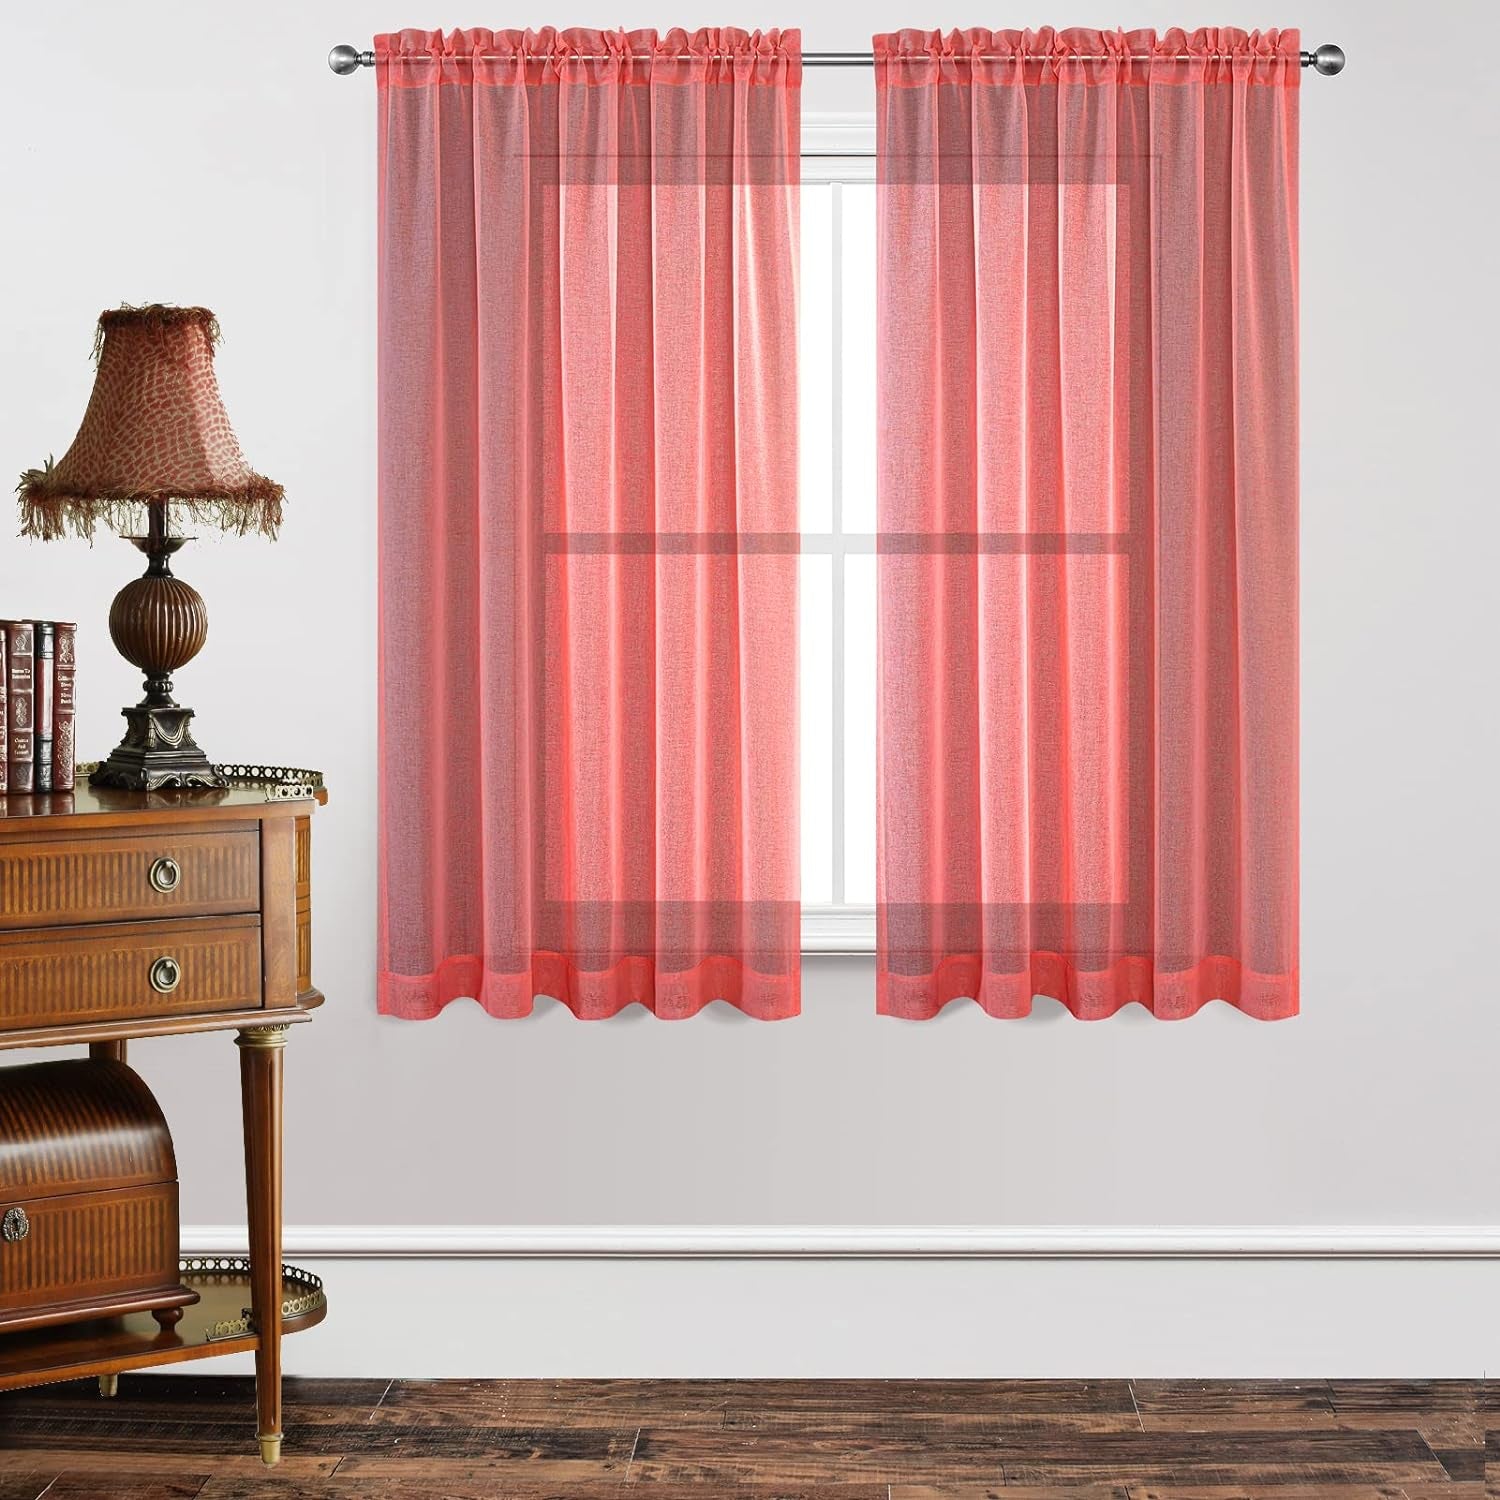 Joydeco White Sheer Curtains 63 Inch Length 2 Panels Set, Rod Pocket Long Sheer Curtains for Window Bedroom Living Room, Lightweight Semi Drape Panels for Yard Patio (54X63 Inch, off White)  Joydeco Red 54W X 63L Inch X 2 Panels 